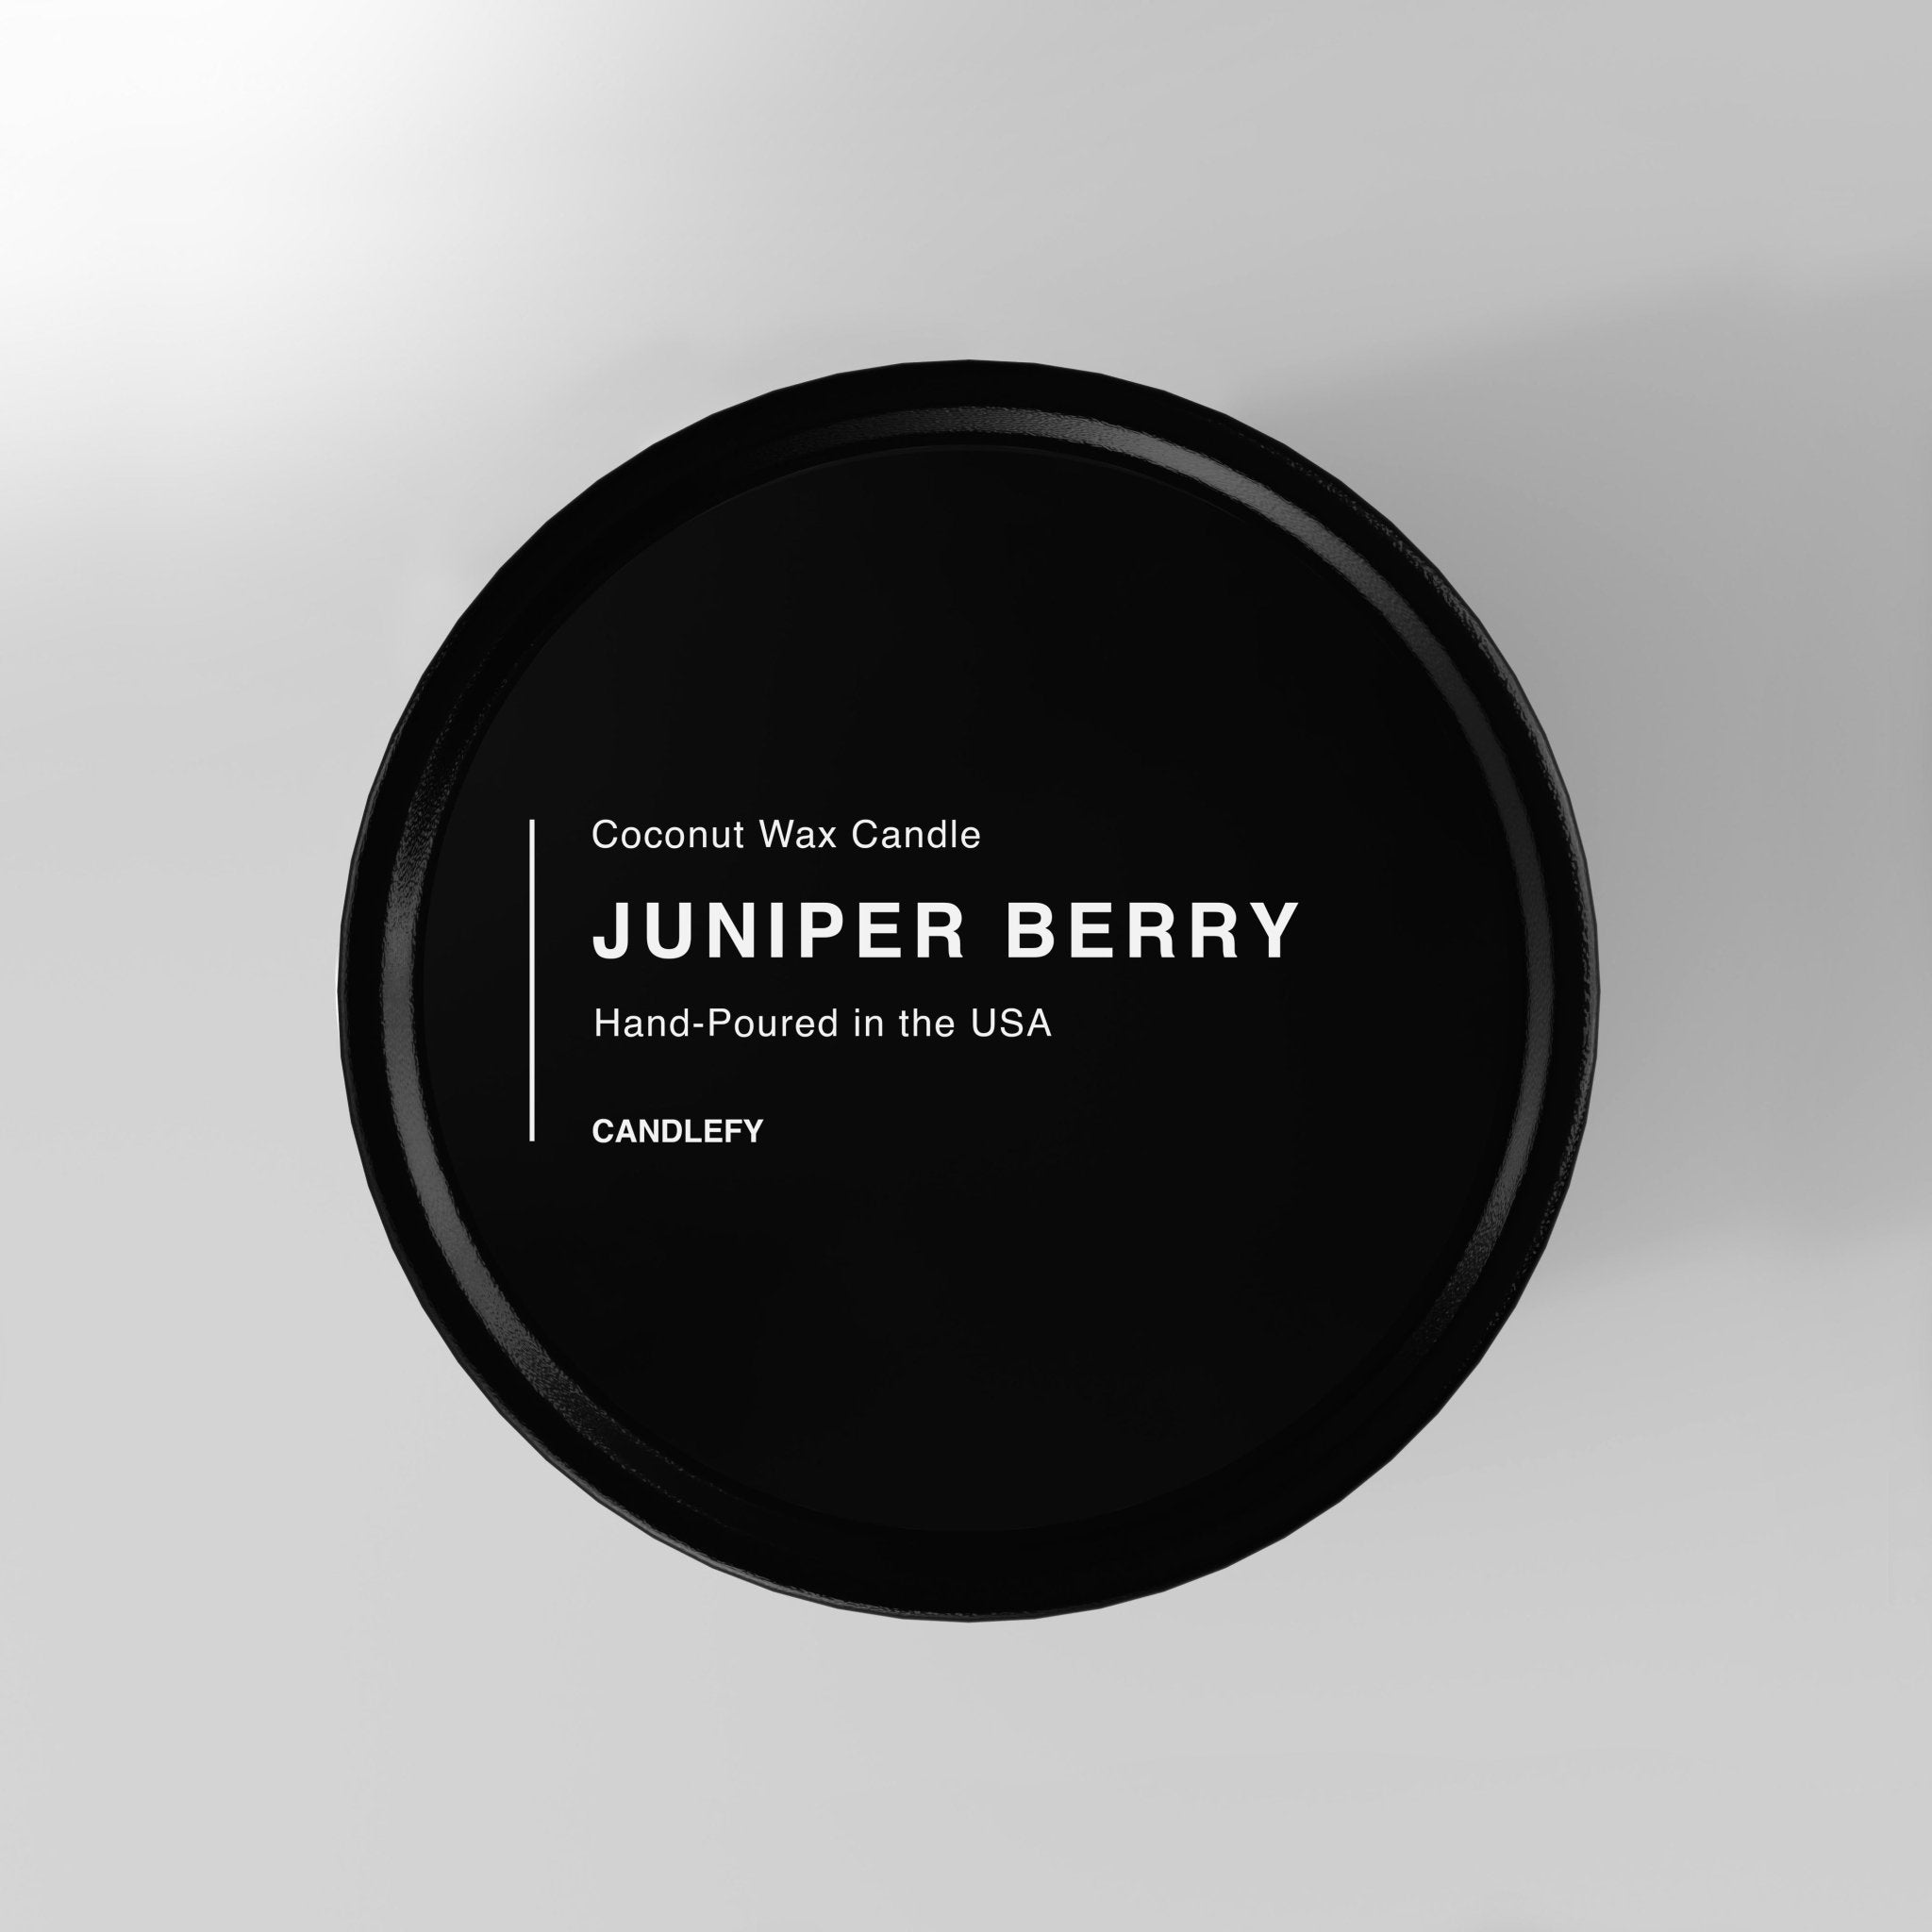 Juniper Berry Natural Wax Scented Candle in Black Travel Tin - Candlefy